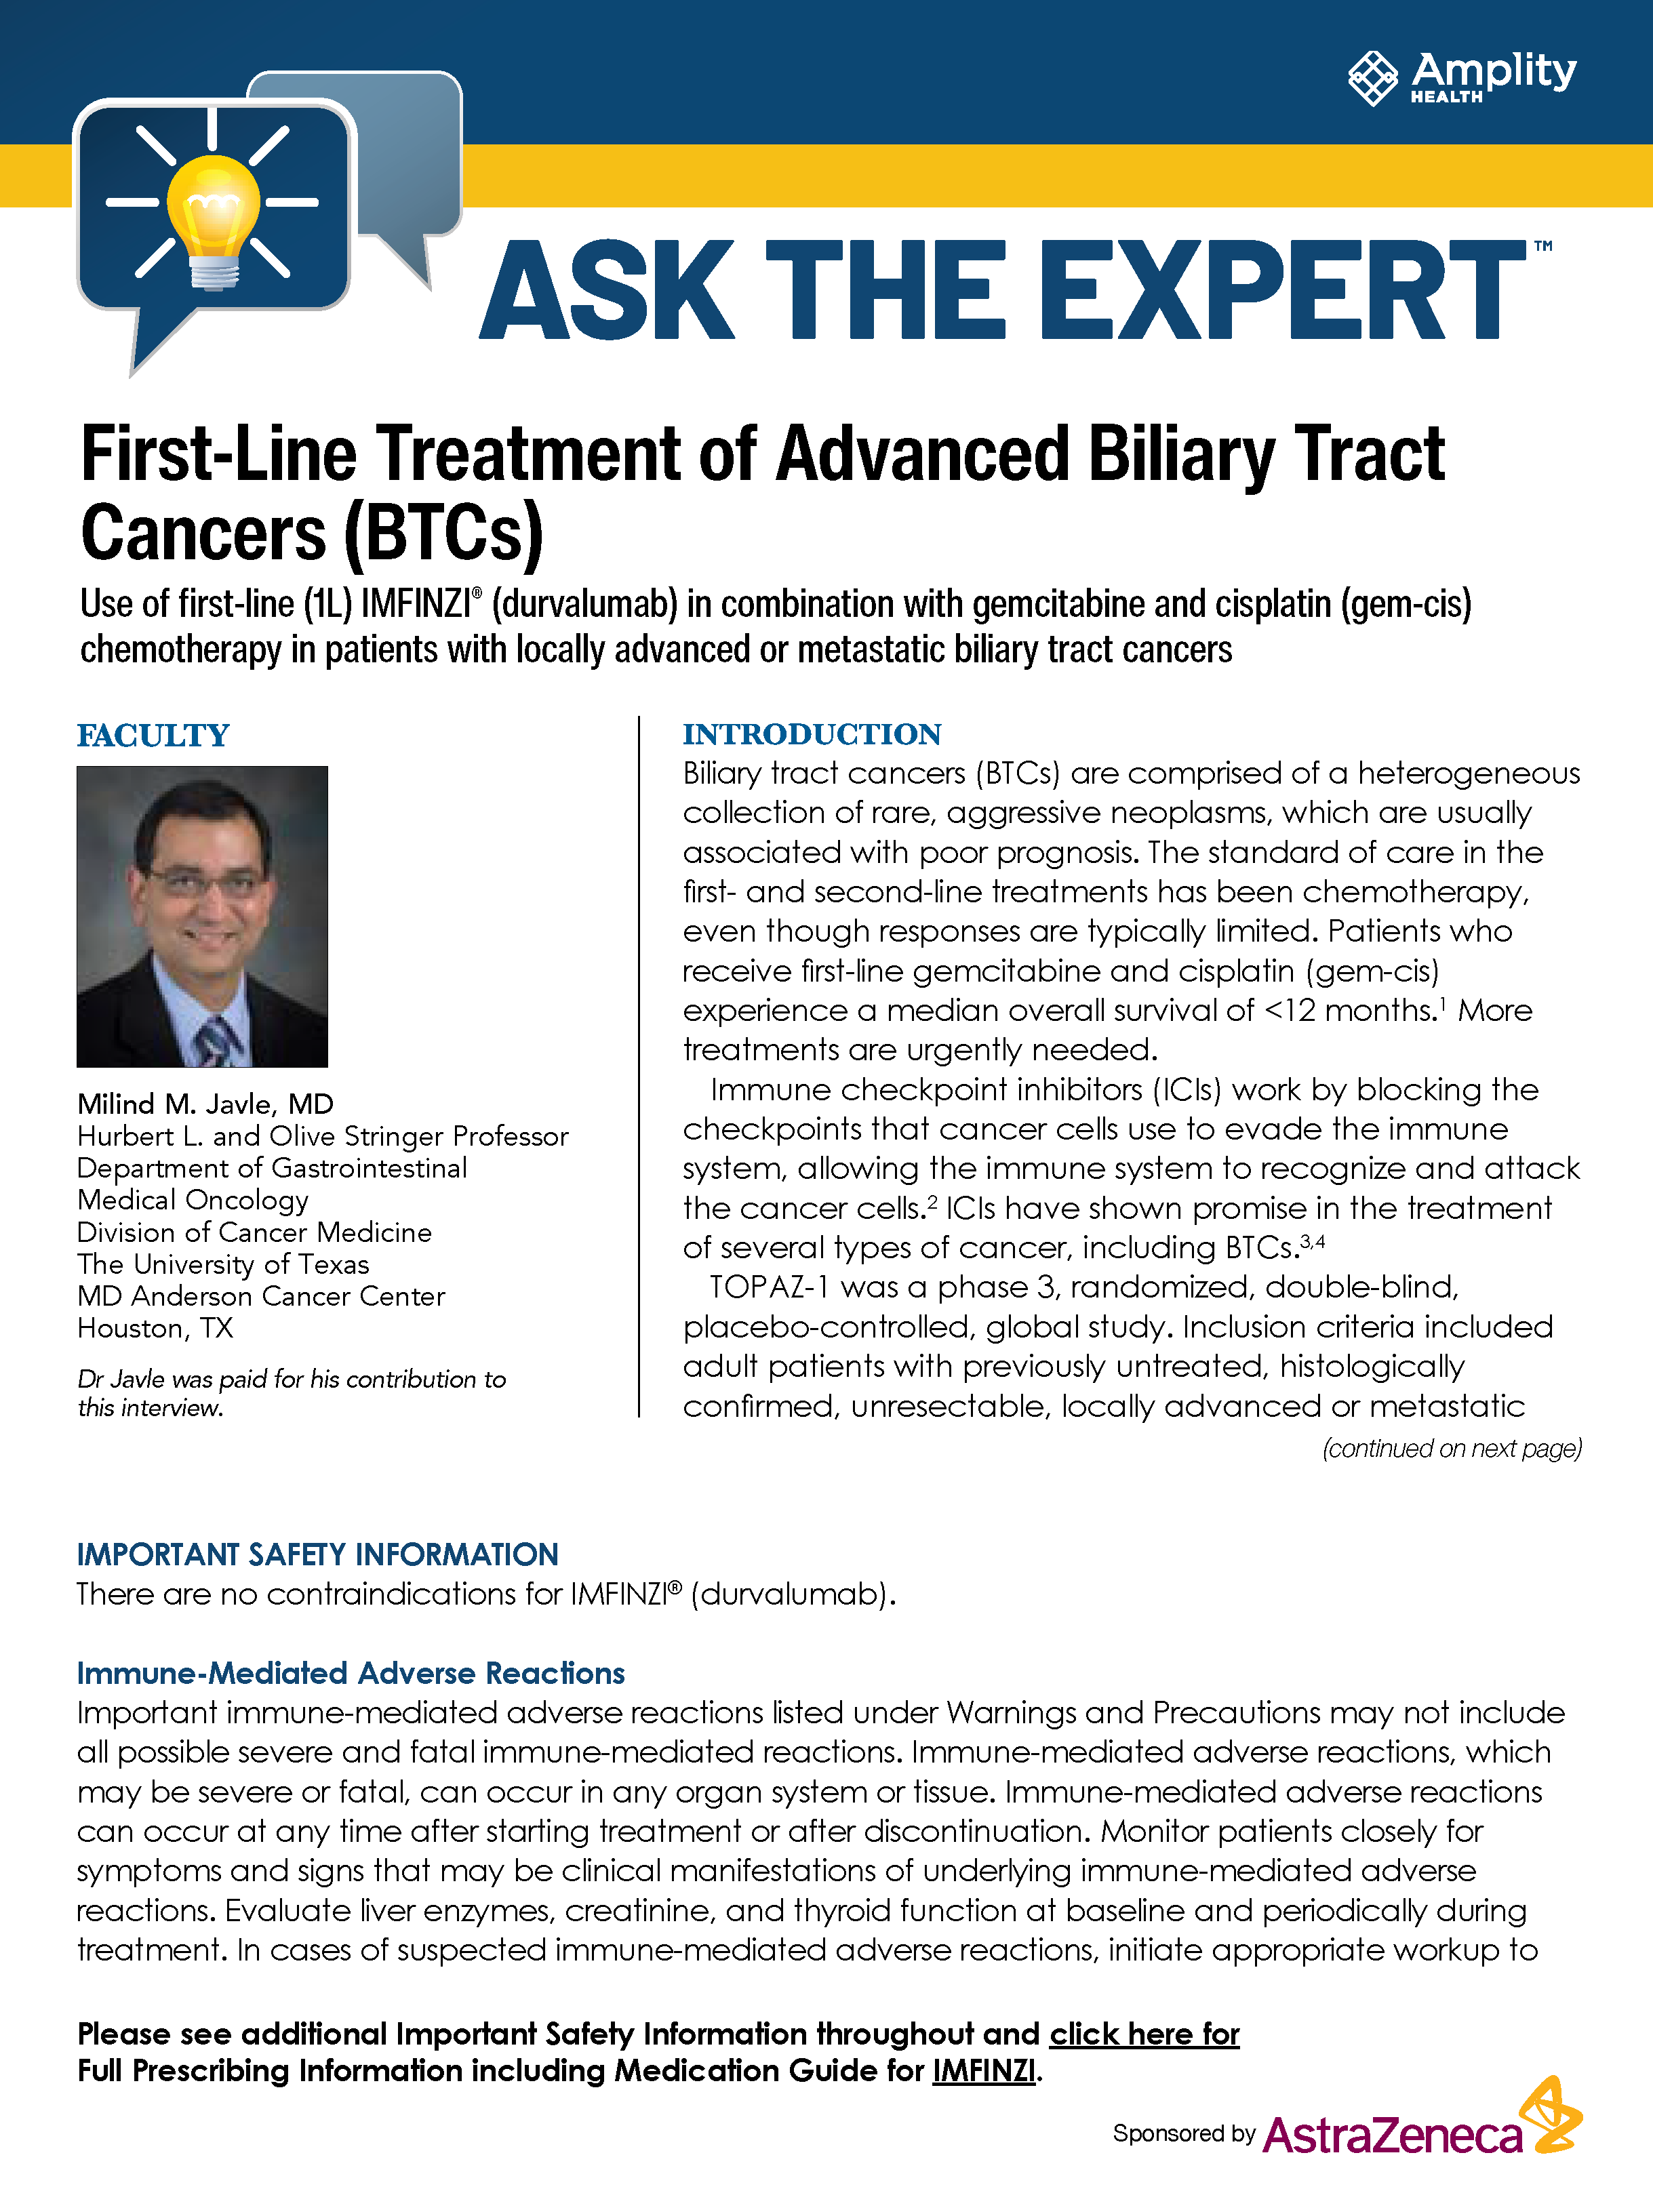 First-Line Treatment of Advanced Biliary Tract Cancers (BTCs)